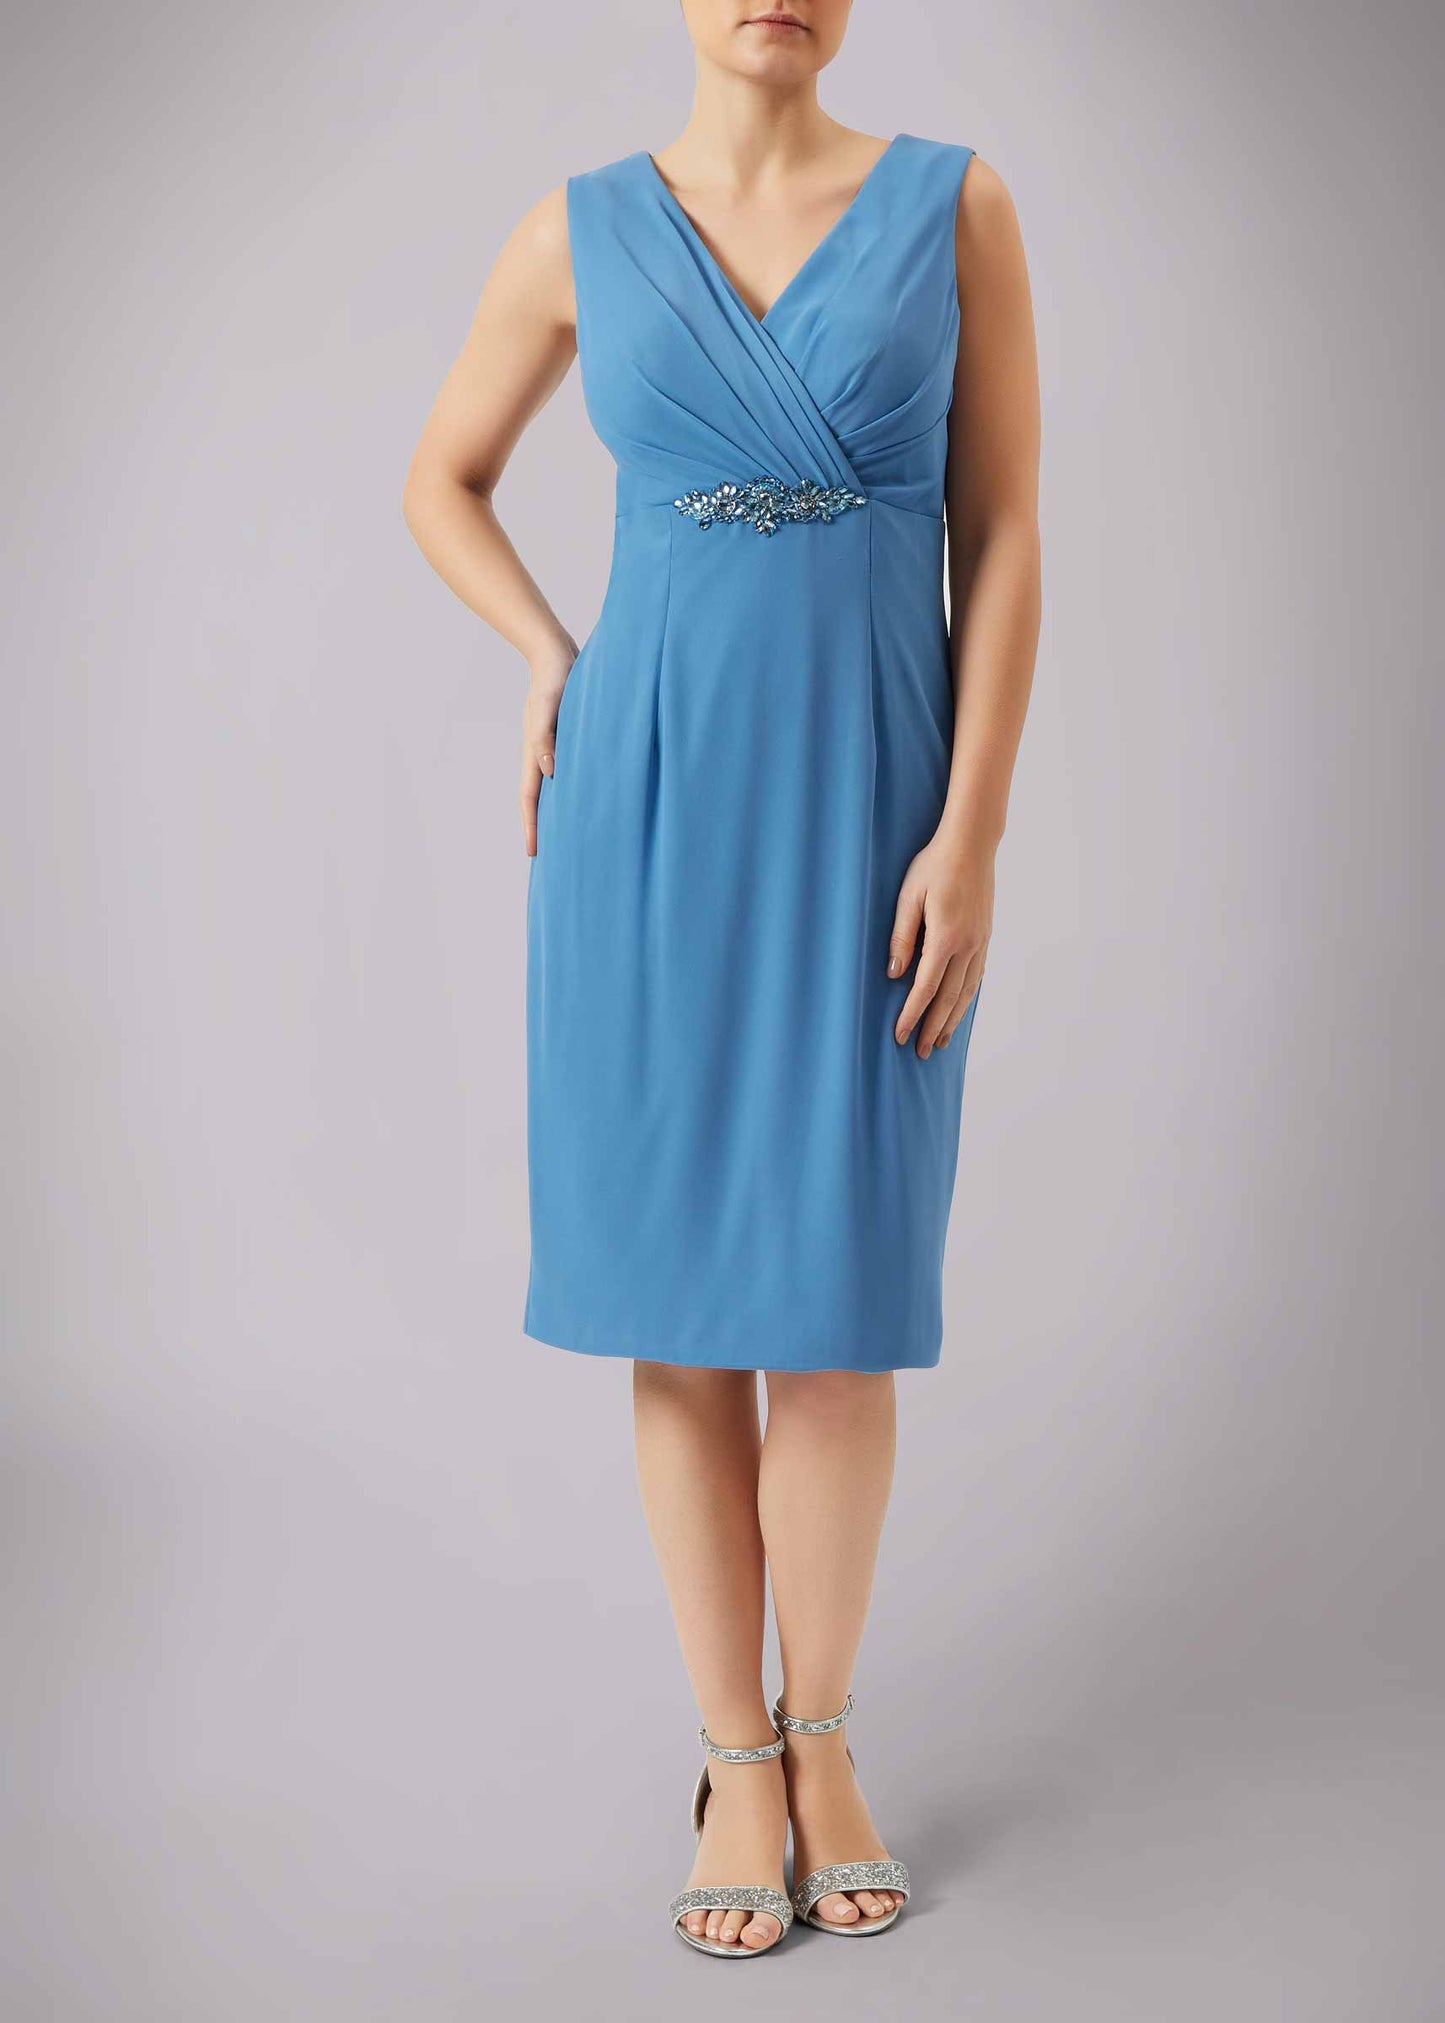 Blue mother of the bride and groom chiffon dress